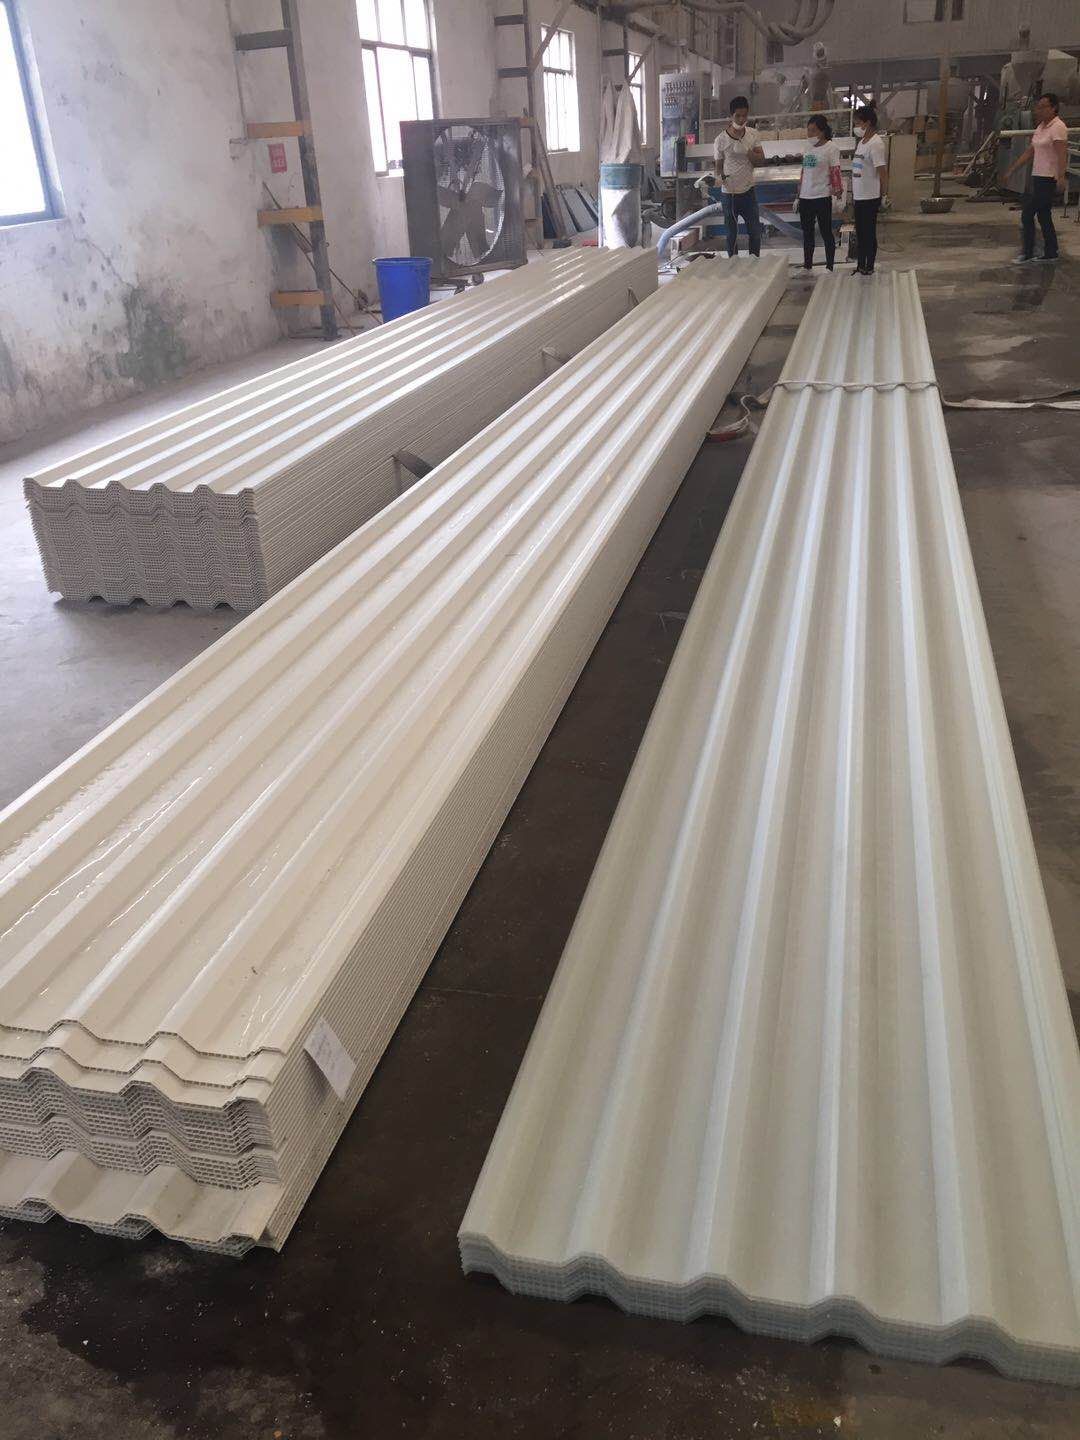 Mexico popular style teja upvcroof tiles/pvc plastic hollow thermo roof sheets for factory